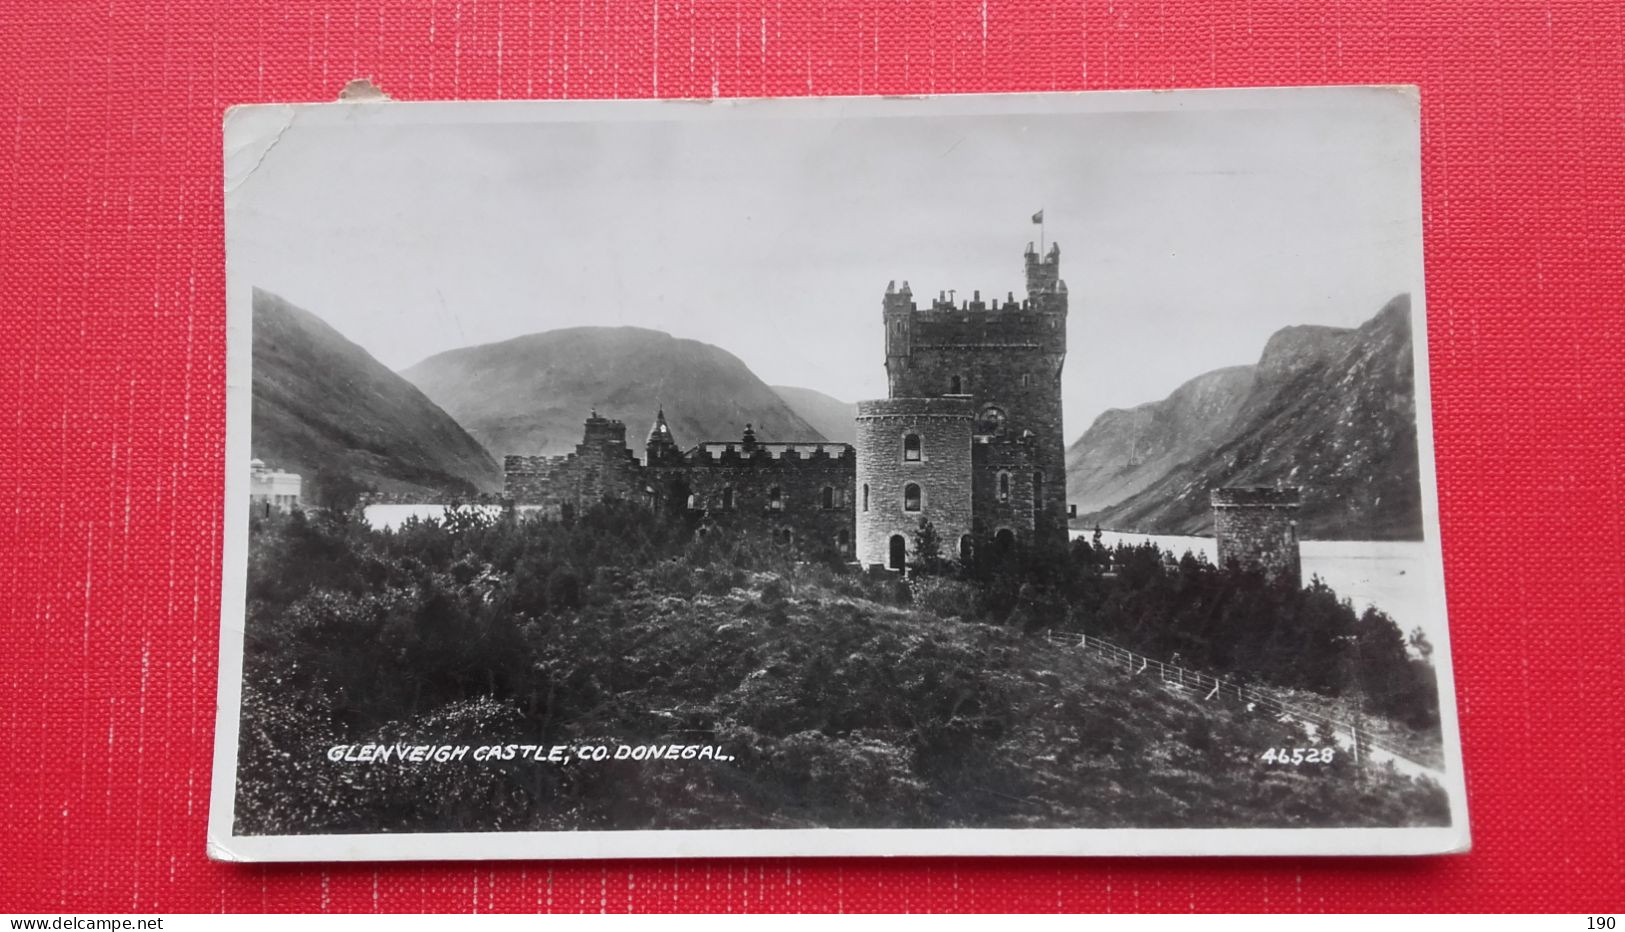 Gleveigh Castle - Donegal